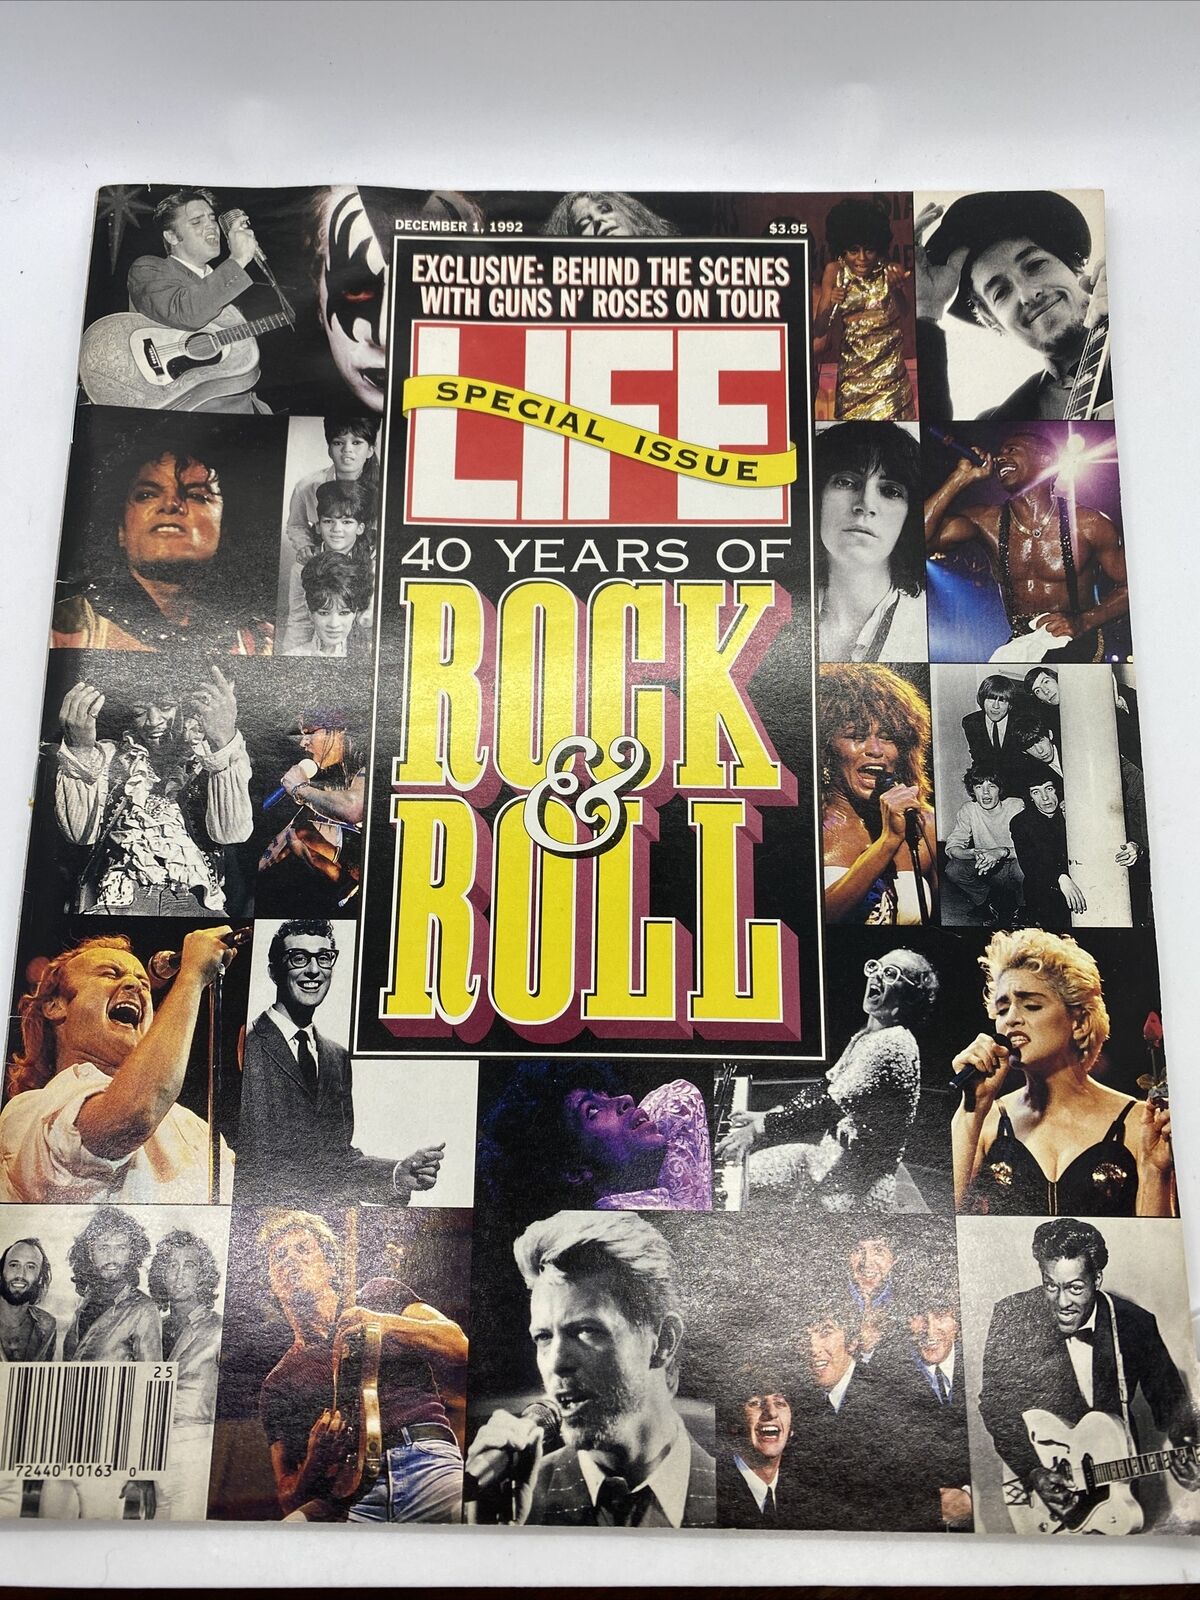 LIFE MAG. SPECIAL EDITION DEC. 1, 1992: 40 YEARS OF ROCK AND ROLL